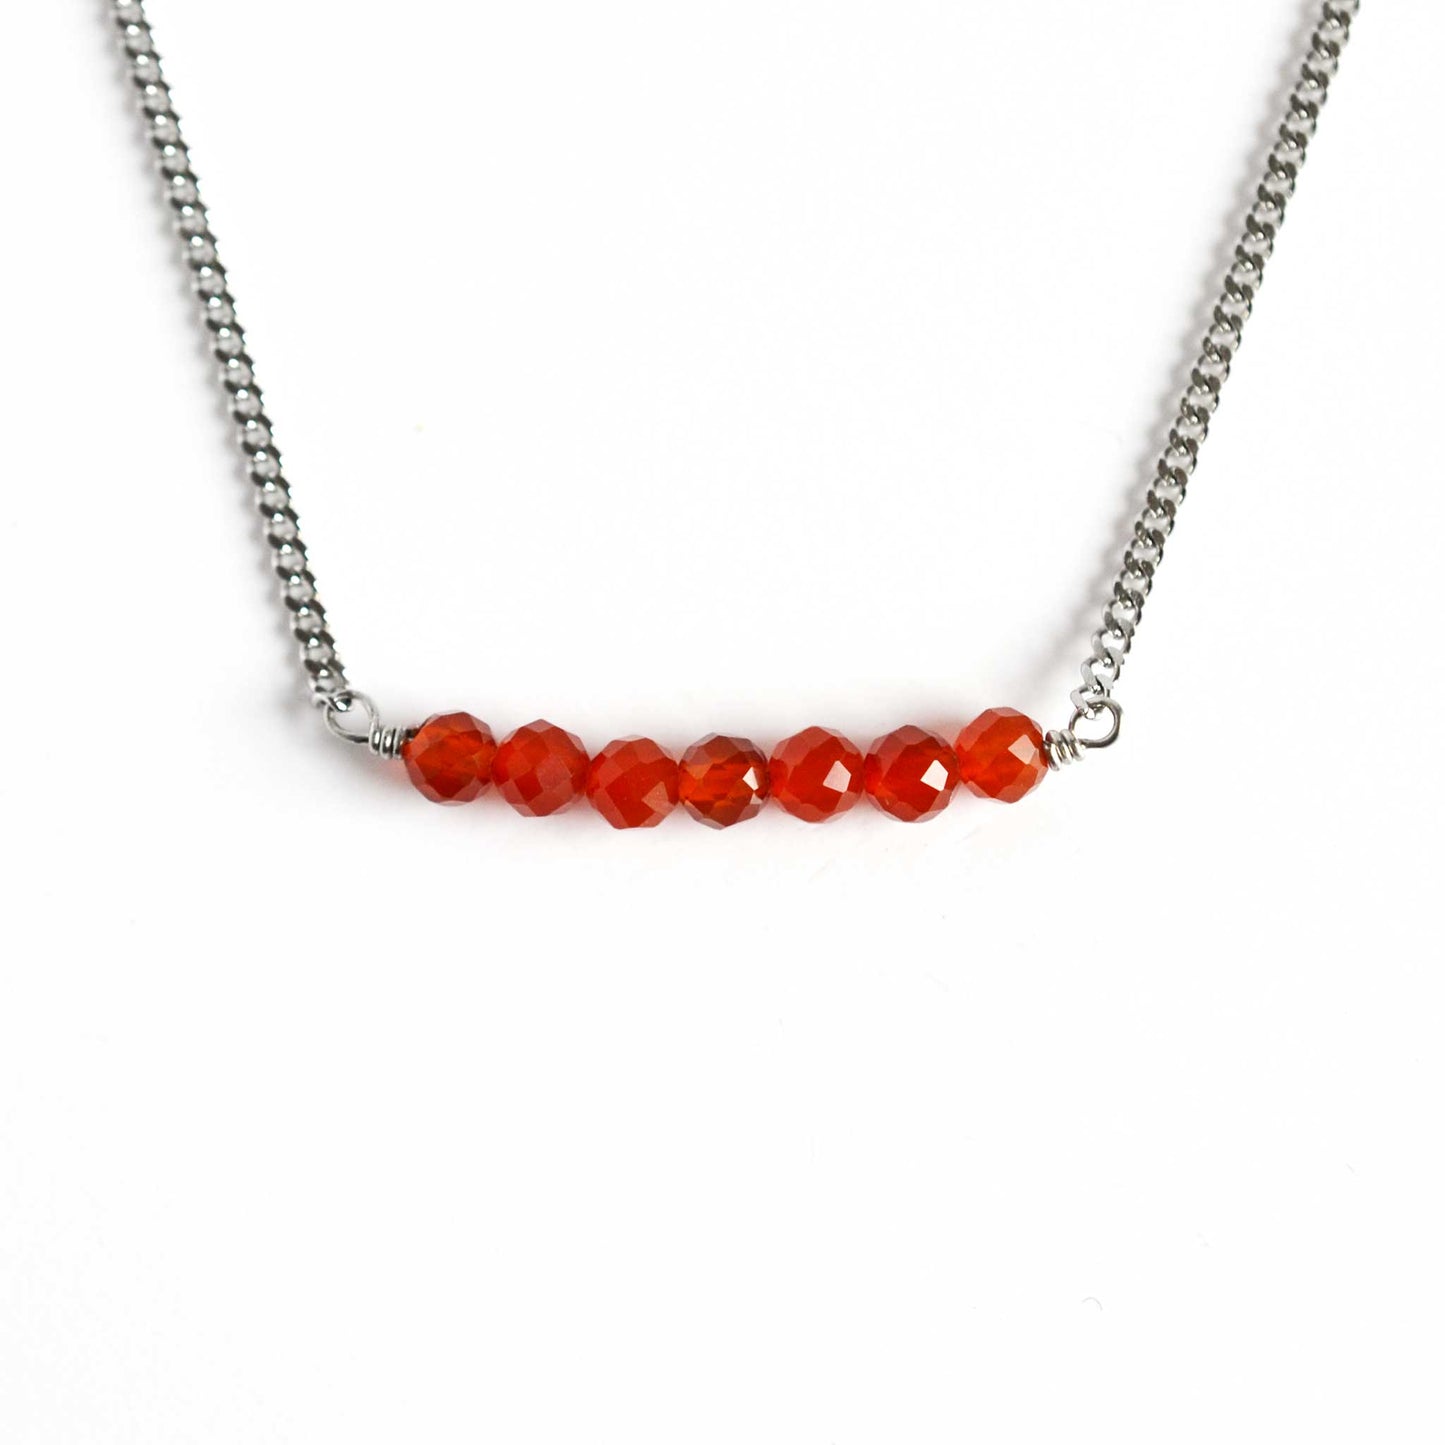 Carnelian necklace with orange stones and hypoallergenic stainless steel chain